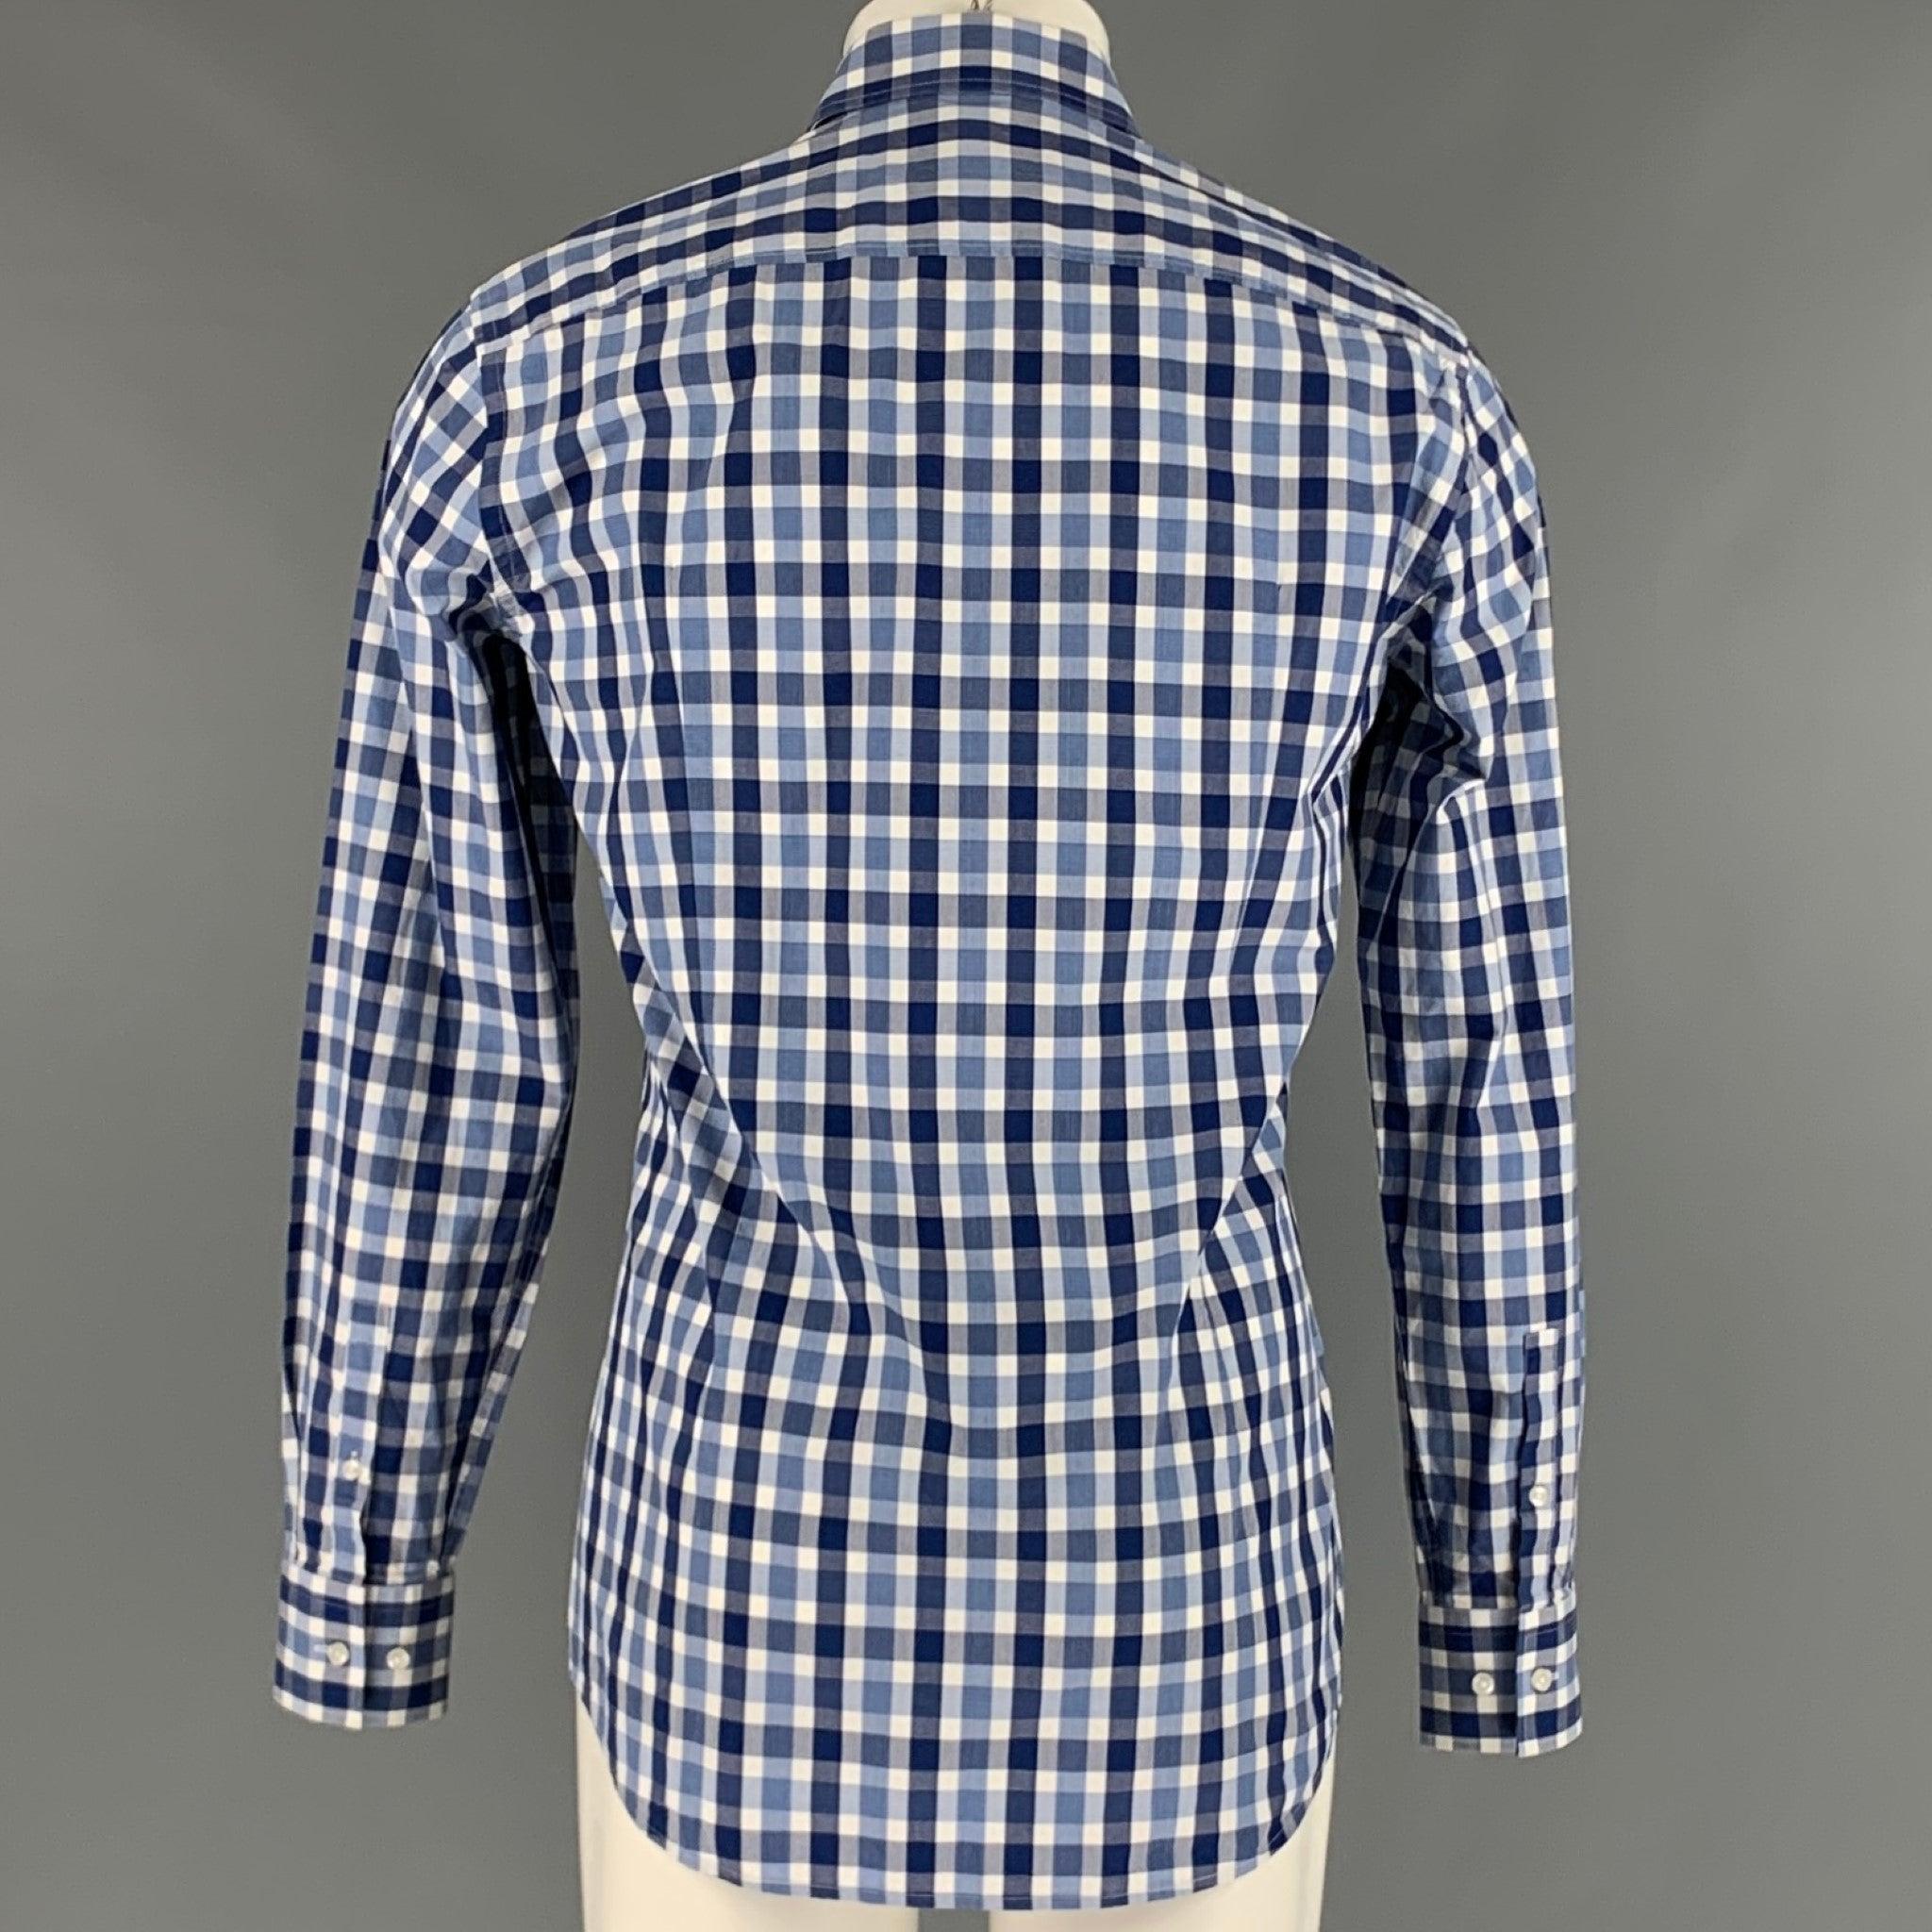 HUGO BOSS Size M Blue White Plaid Cotton Long Sleeve Shirt In Good Condition For Sale In San Francisco, CA